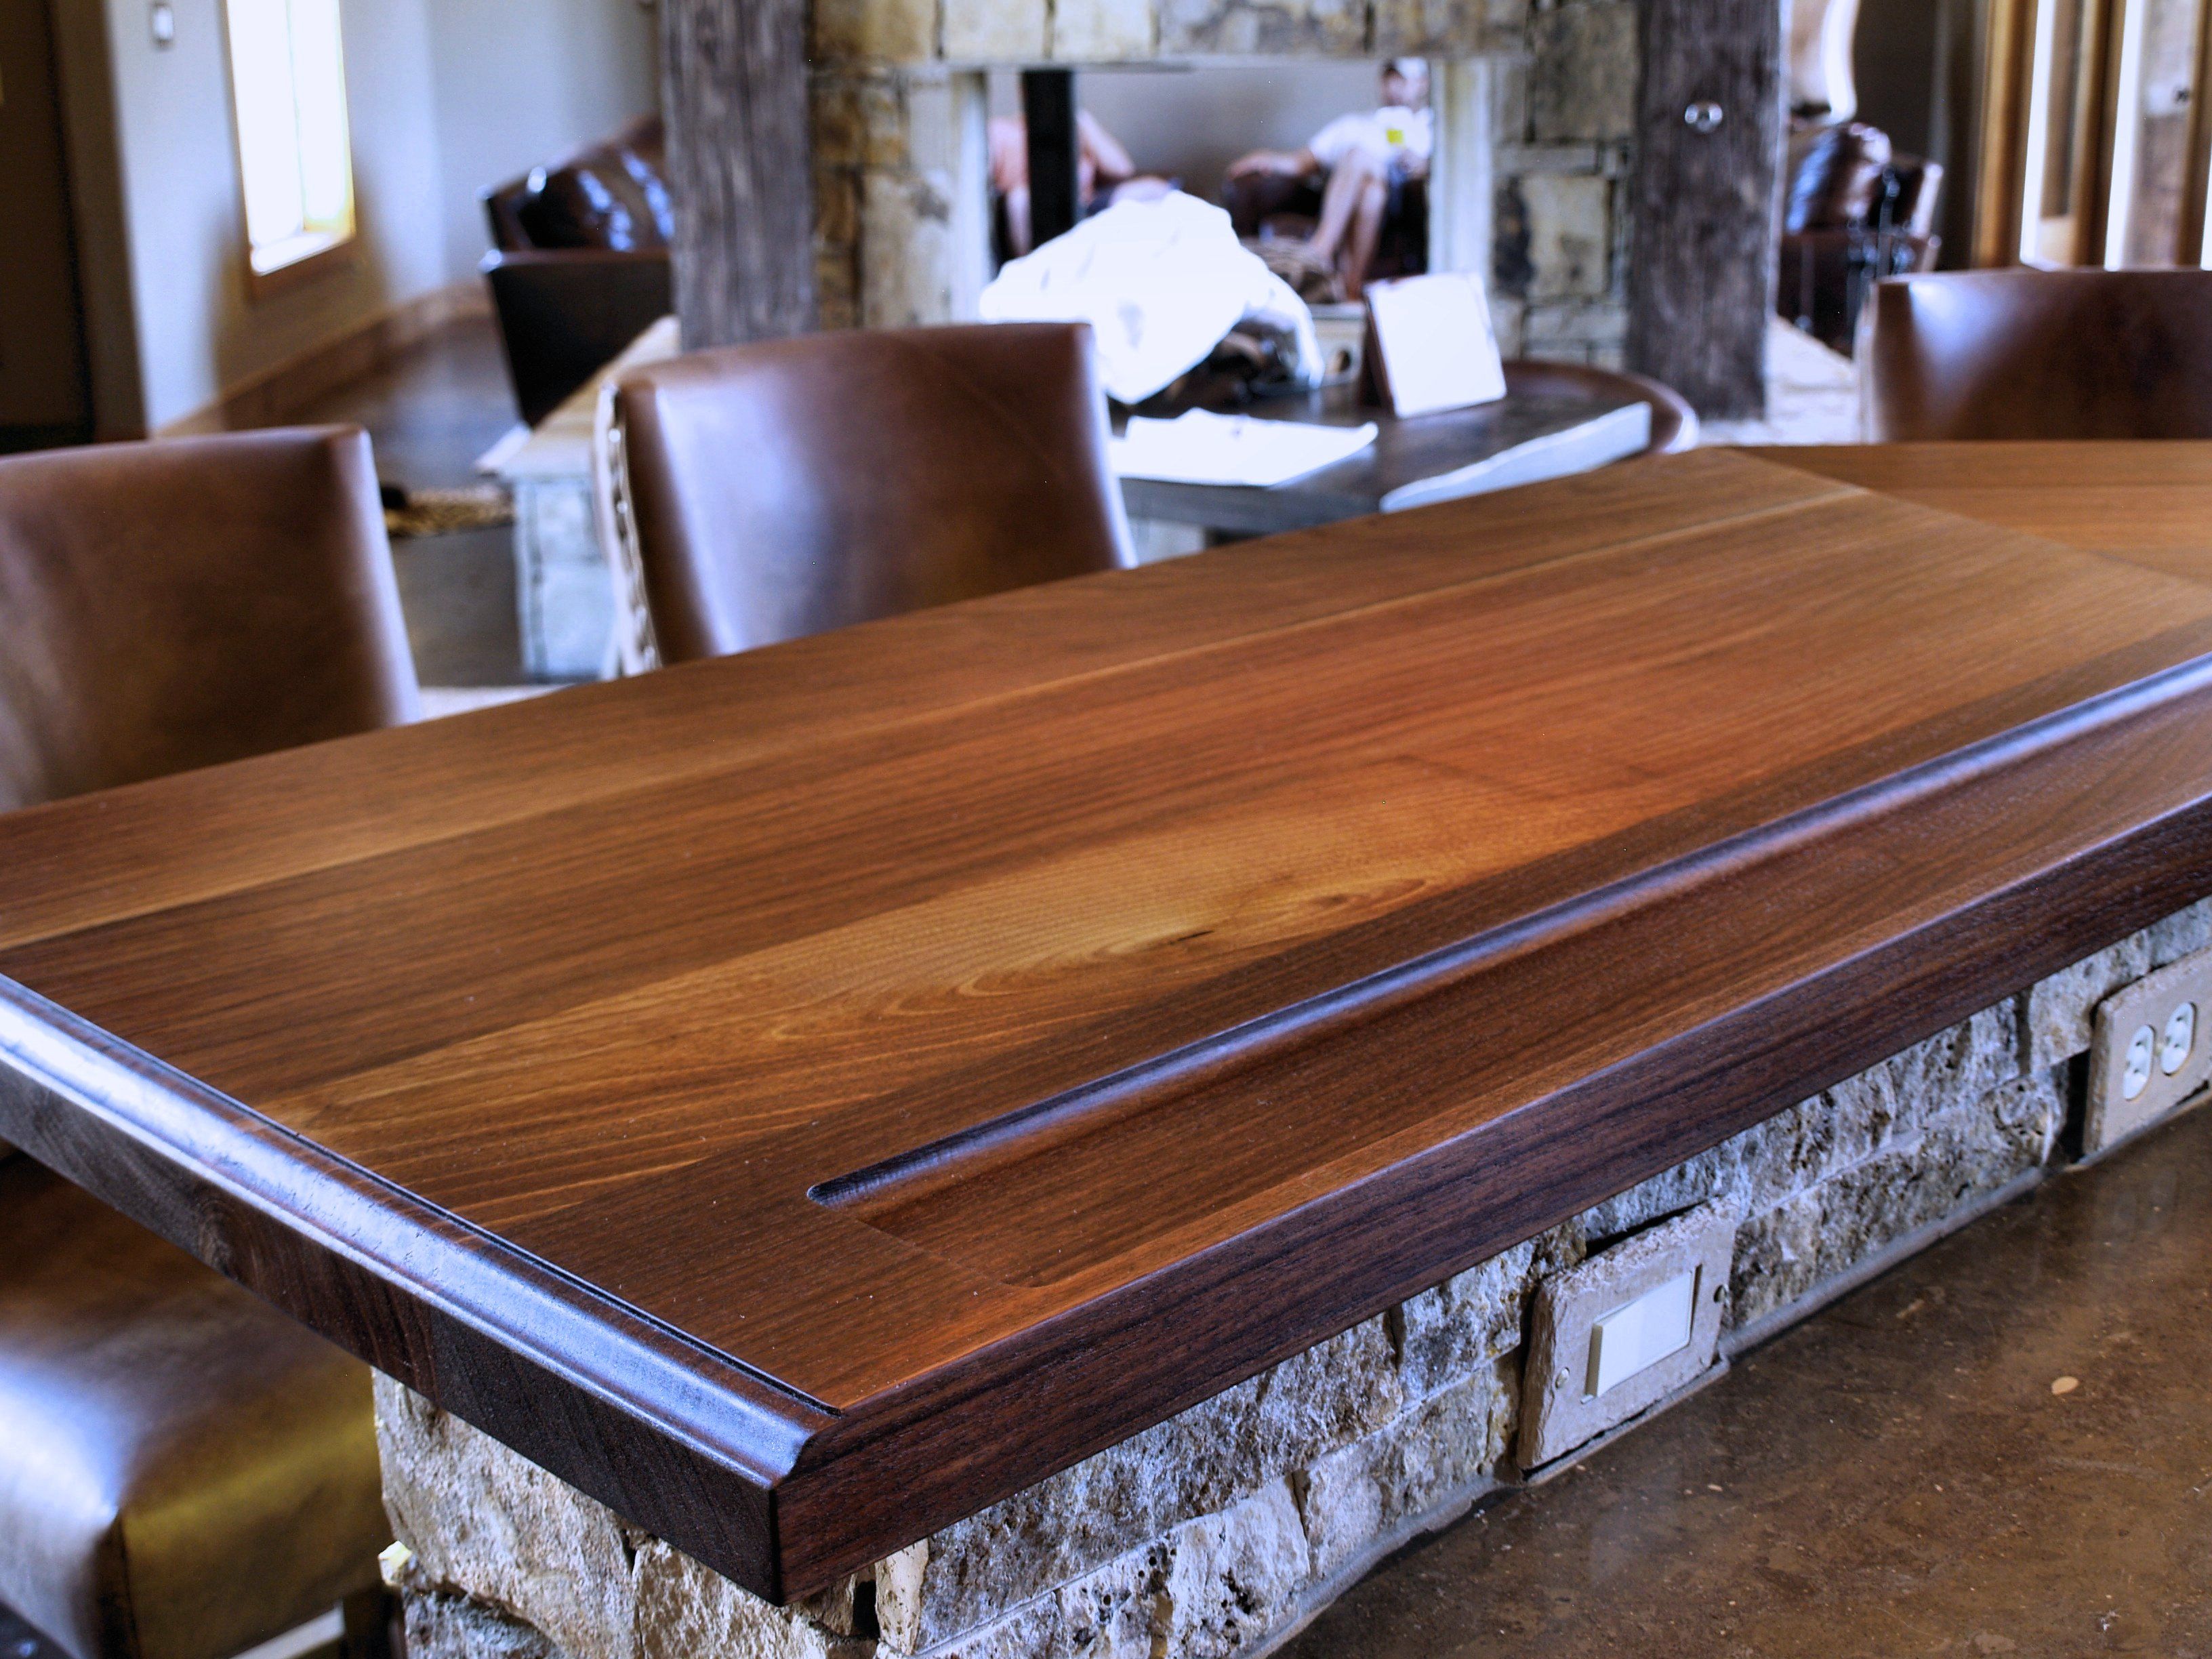 Slab Walnut Wood Countertop Photo Gallery, by Woodworking